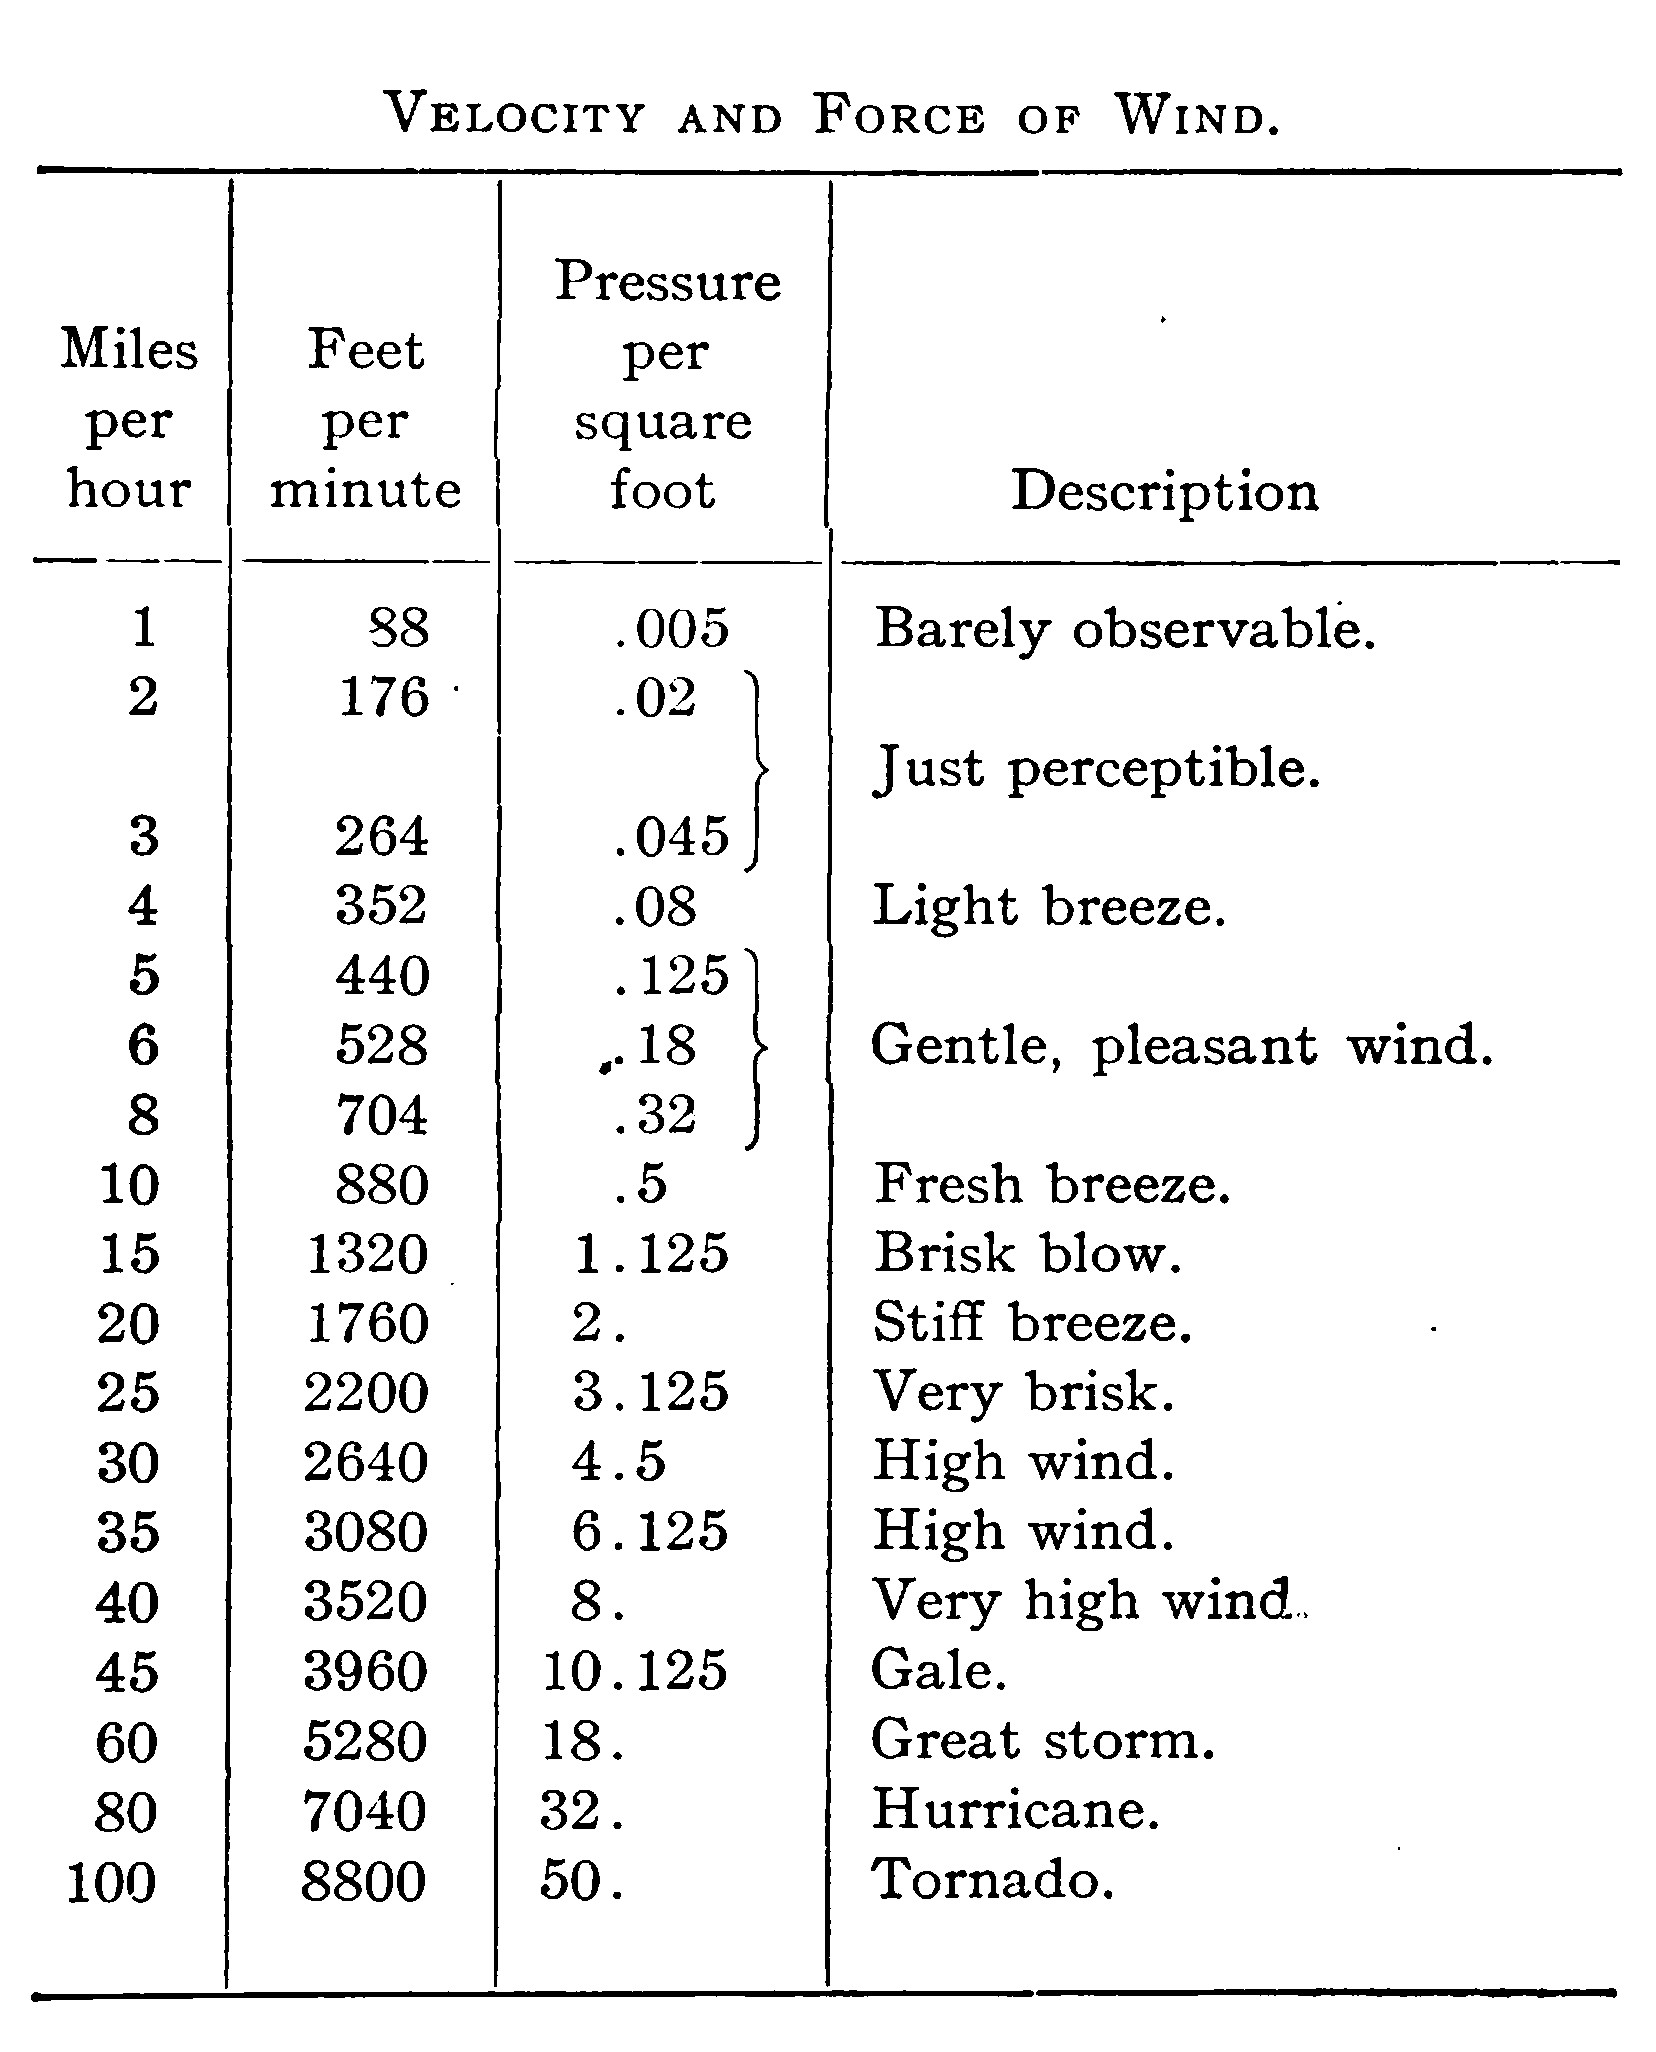 TABLE VELOCITY AND FORCE OF WIND.